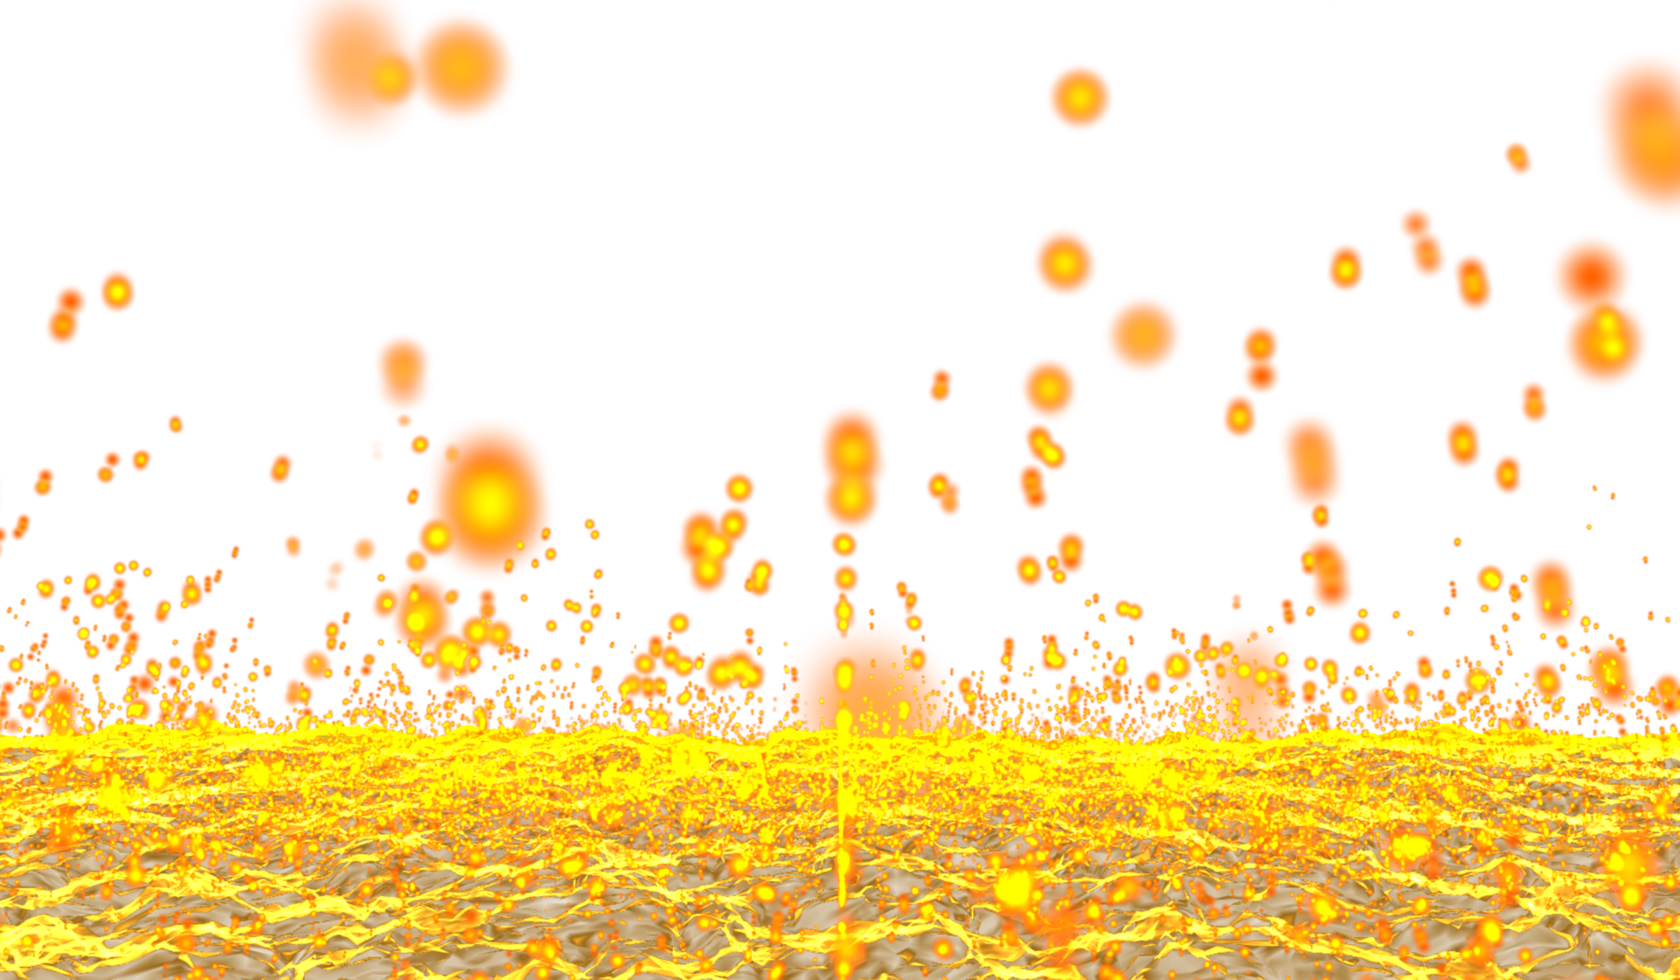 Digital technology abstract 3d orange-yellow light particles raining hits water waves png